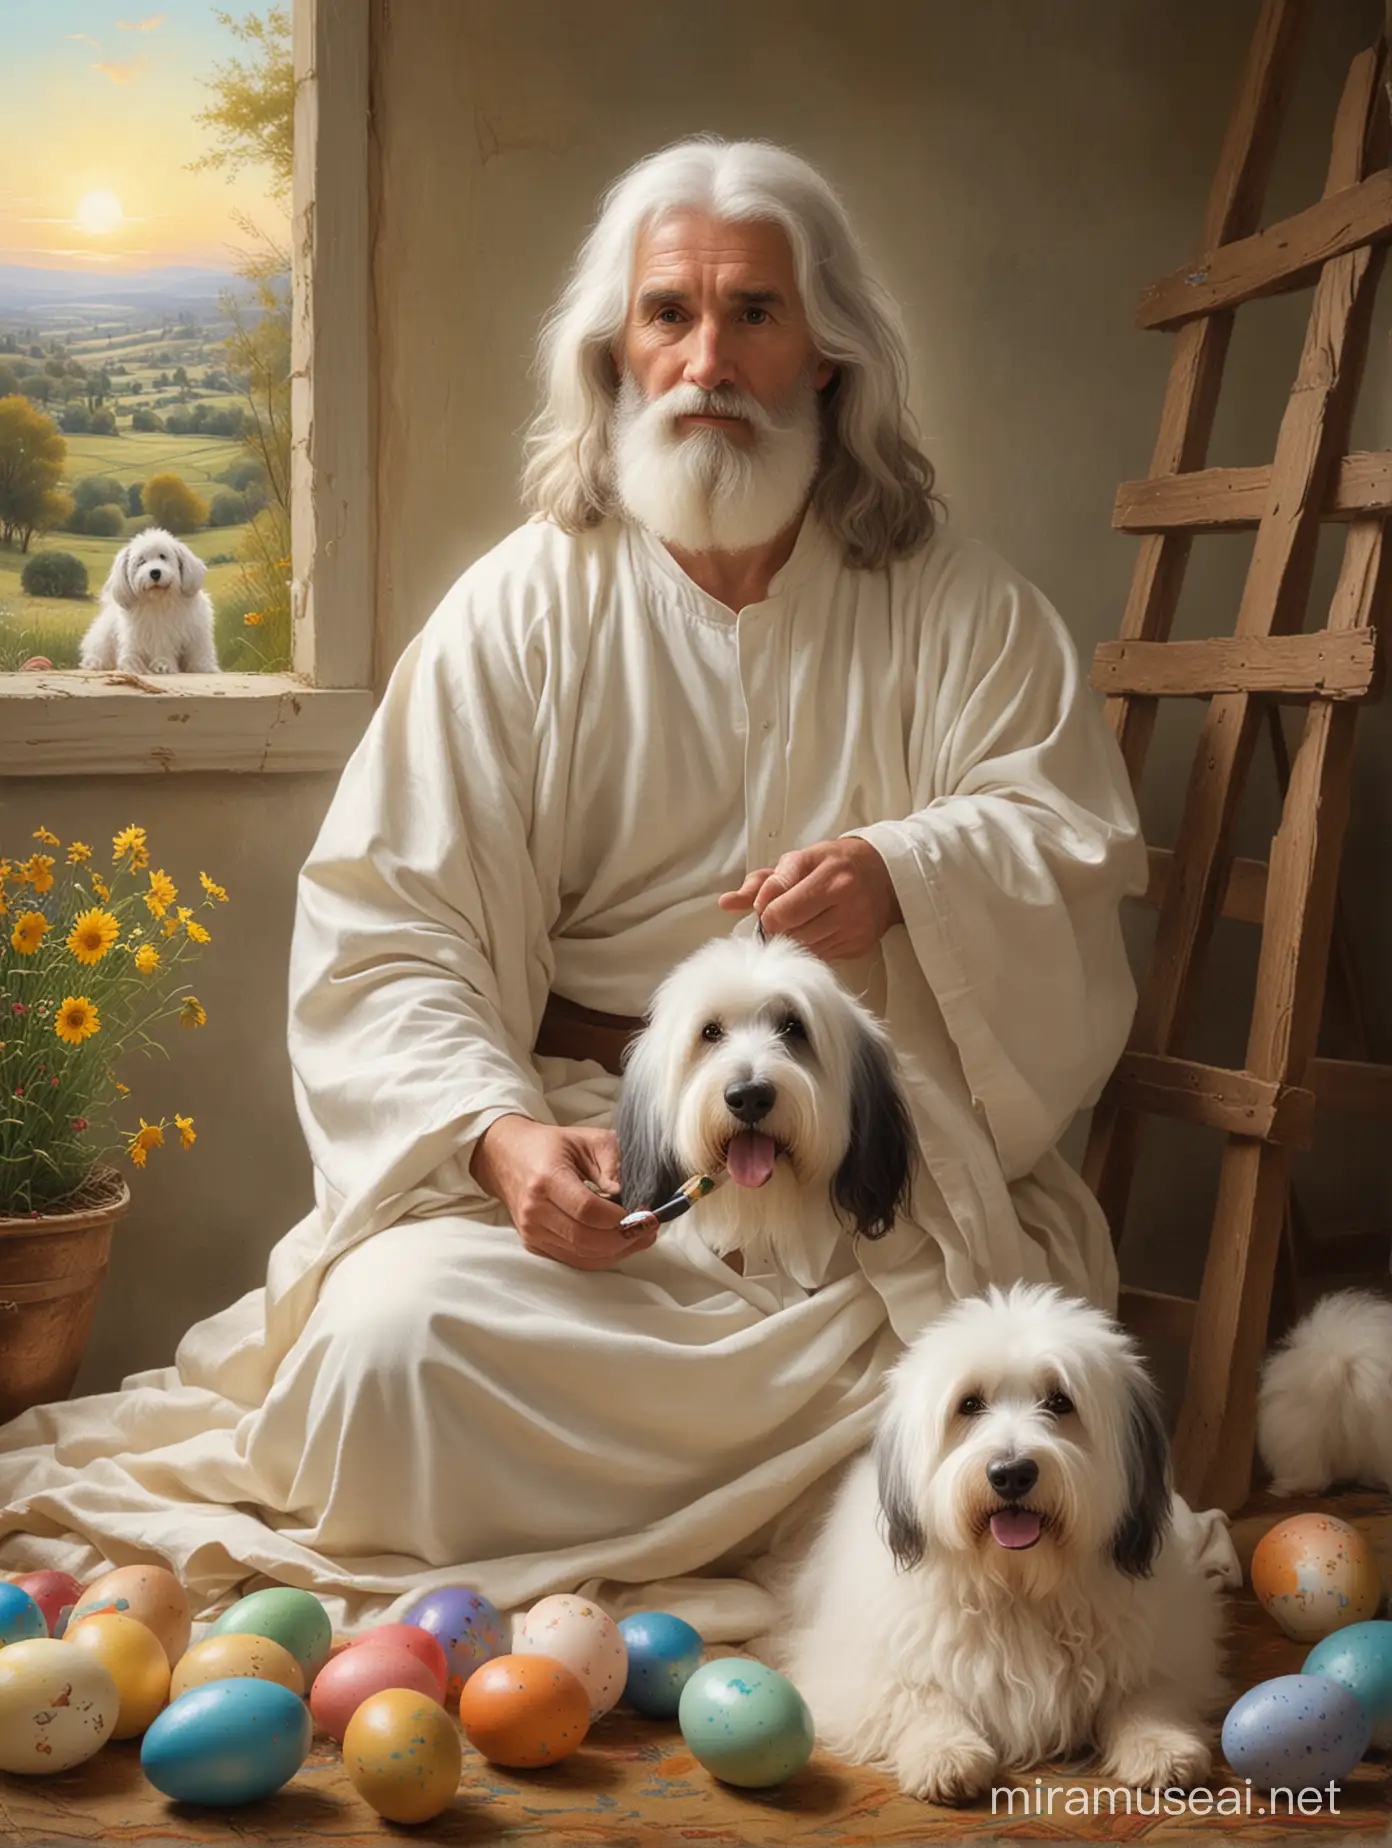 Jesus painting eastereggs, with his eyes open and an old English sheepdog sitting next to him